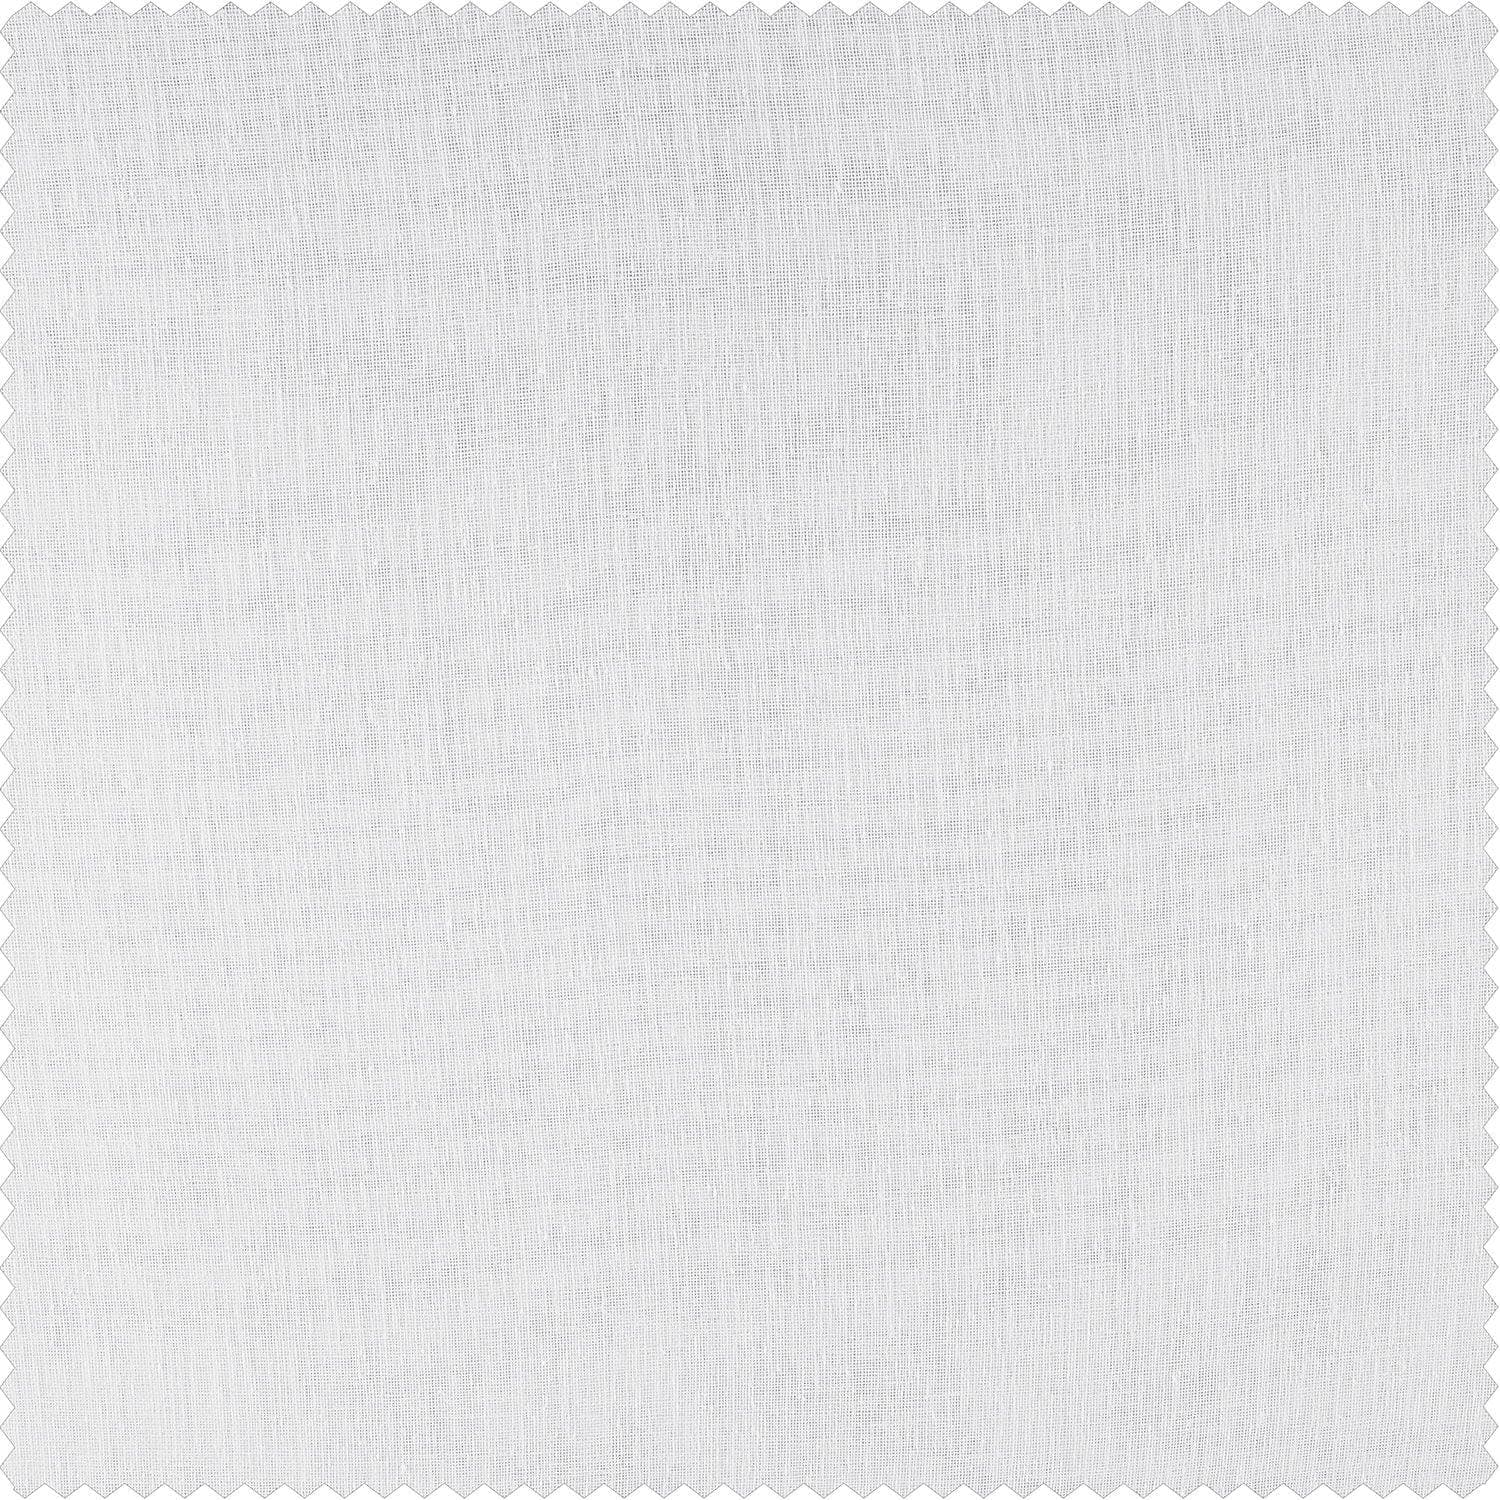 Cirro Off White Solid Linen Sheer Curtain Pair (2 Panels)